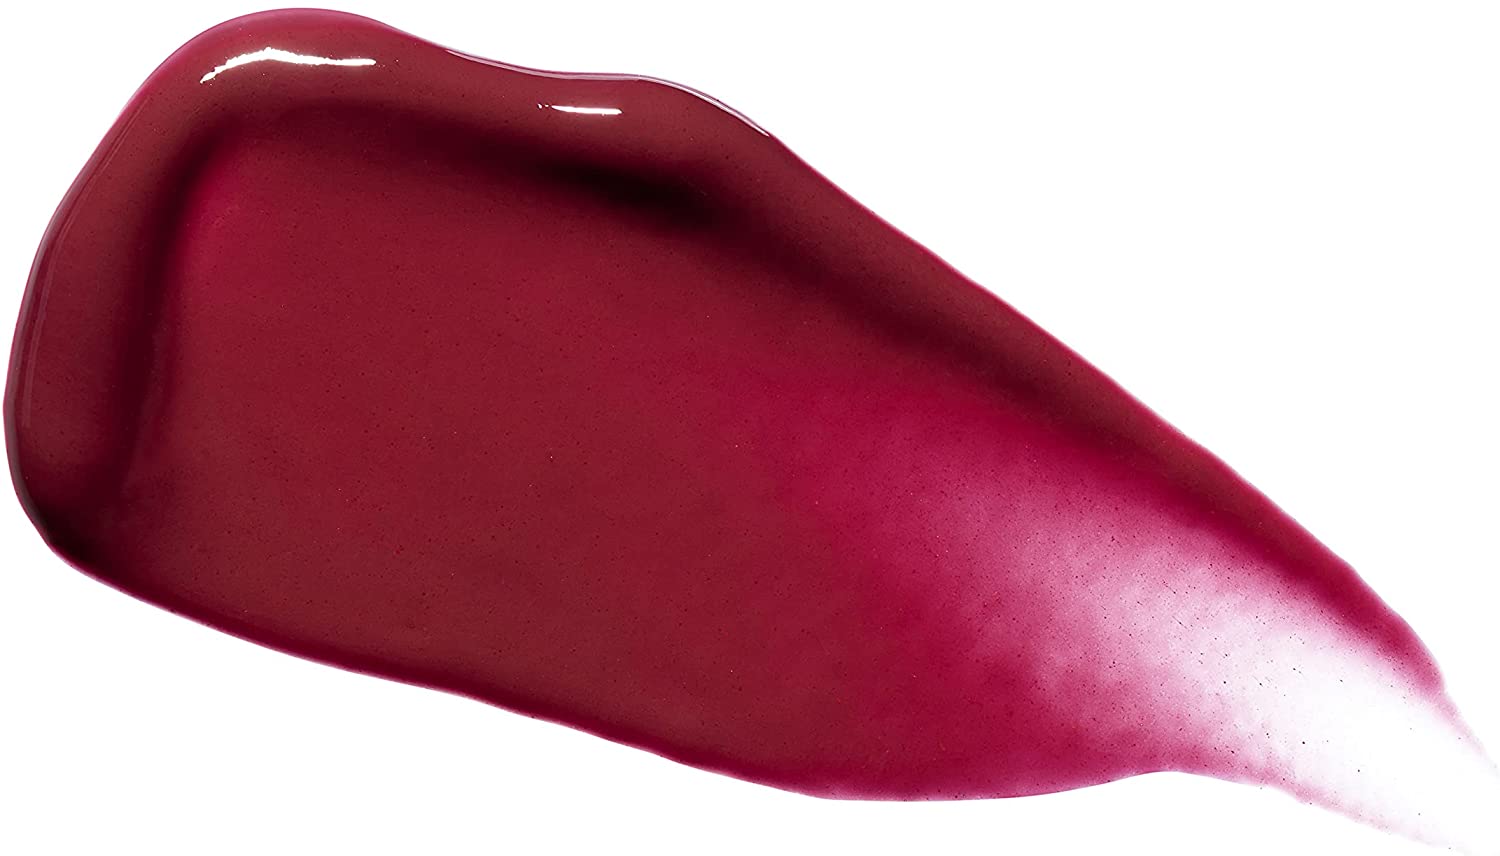 Hydropeptide Perfecting Lip Gloss in shade Berry Breeze